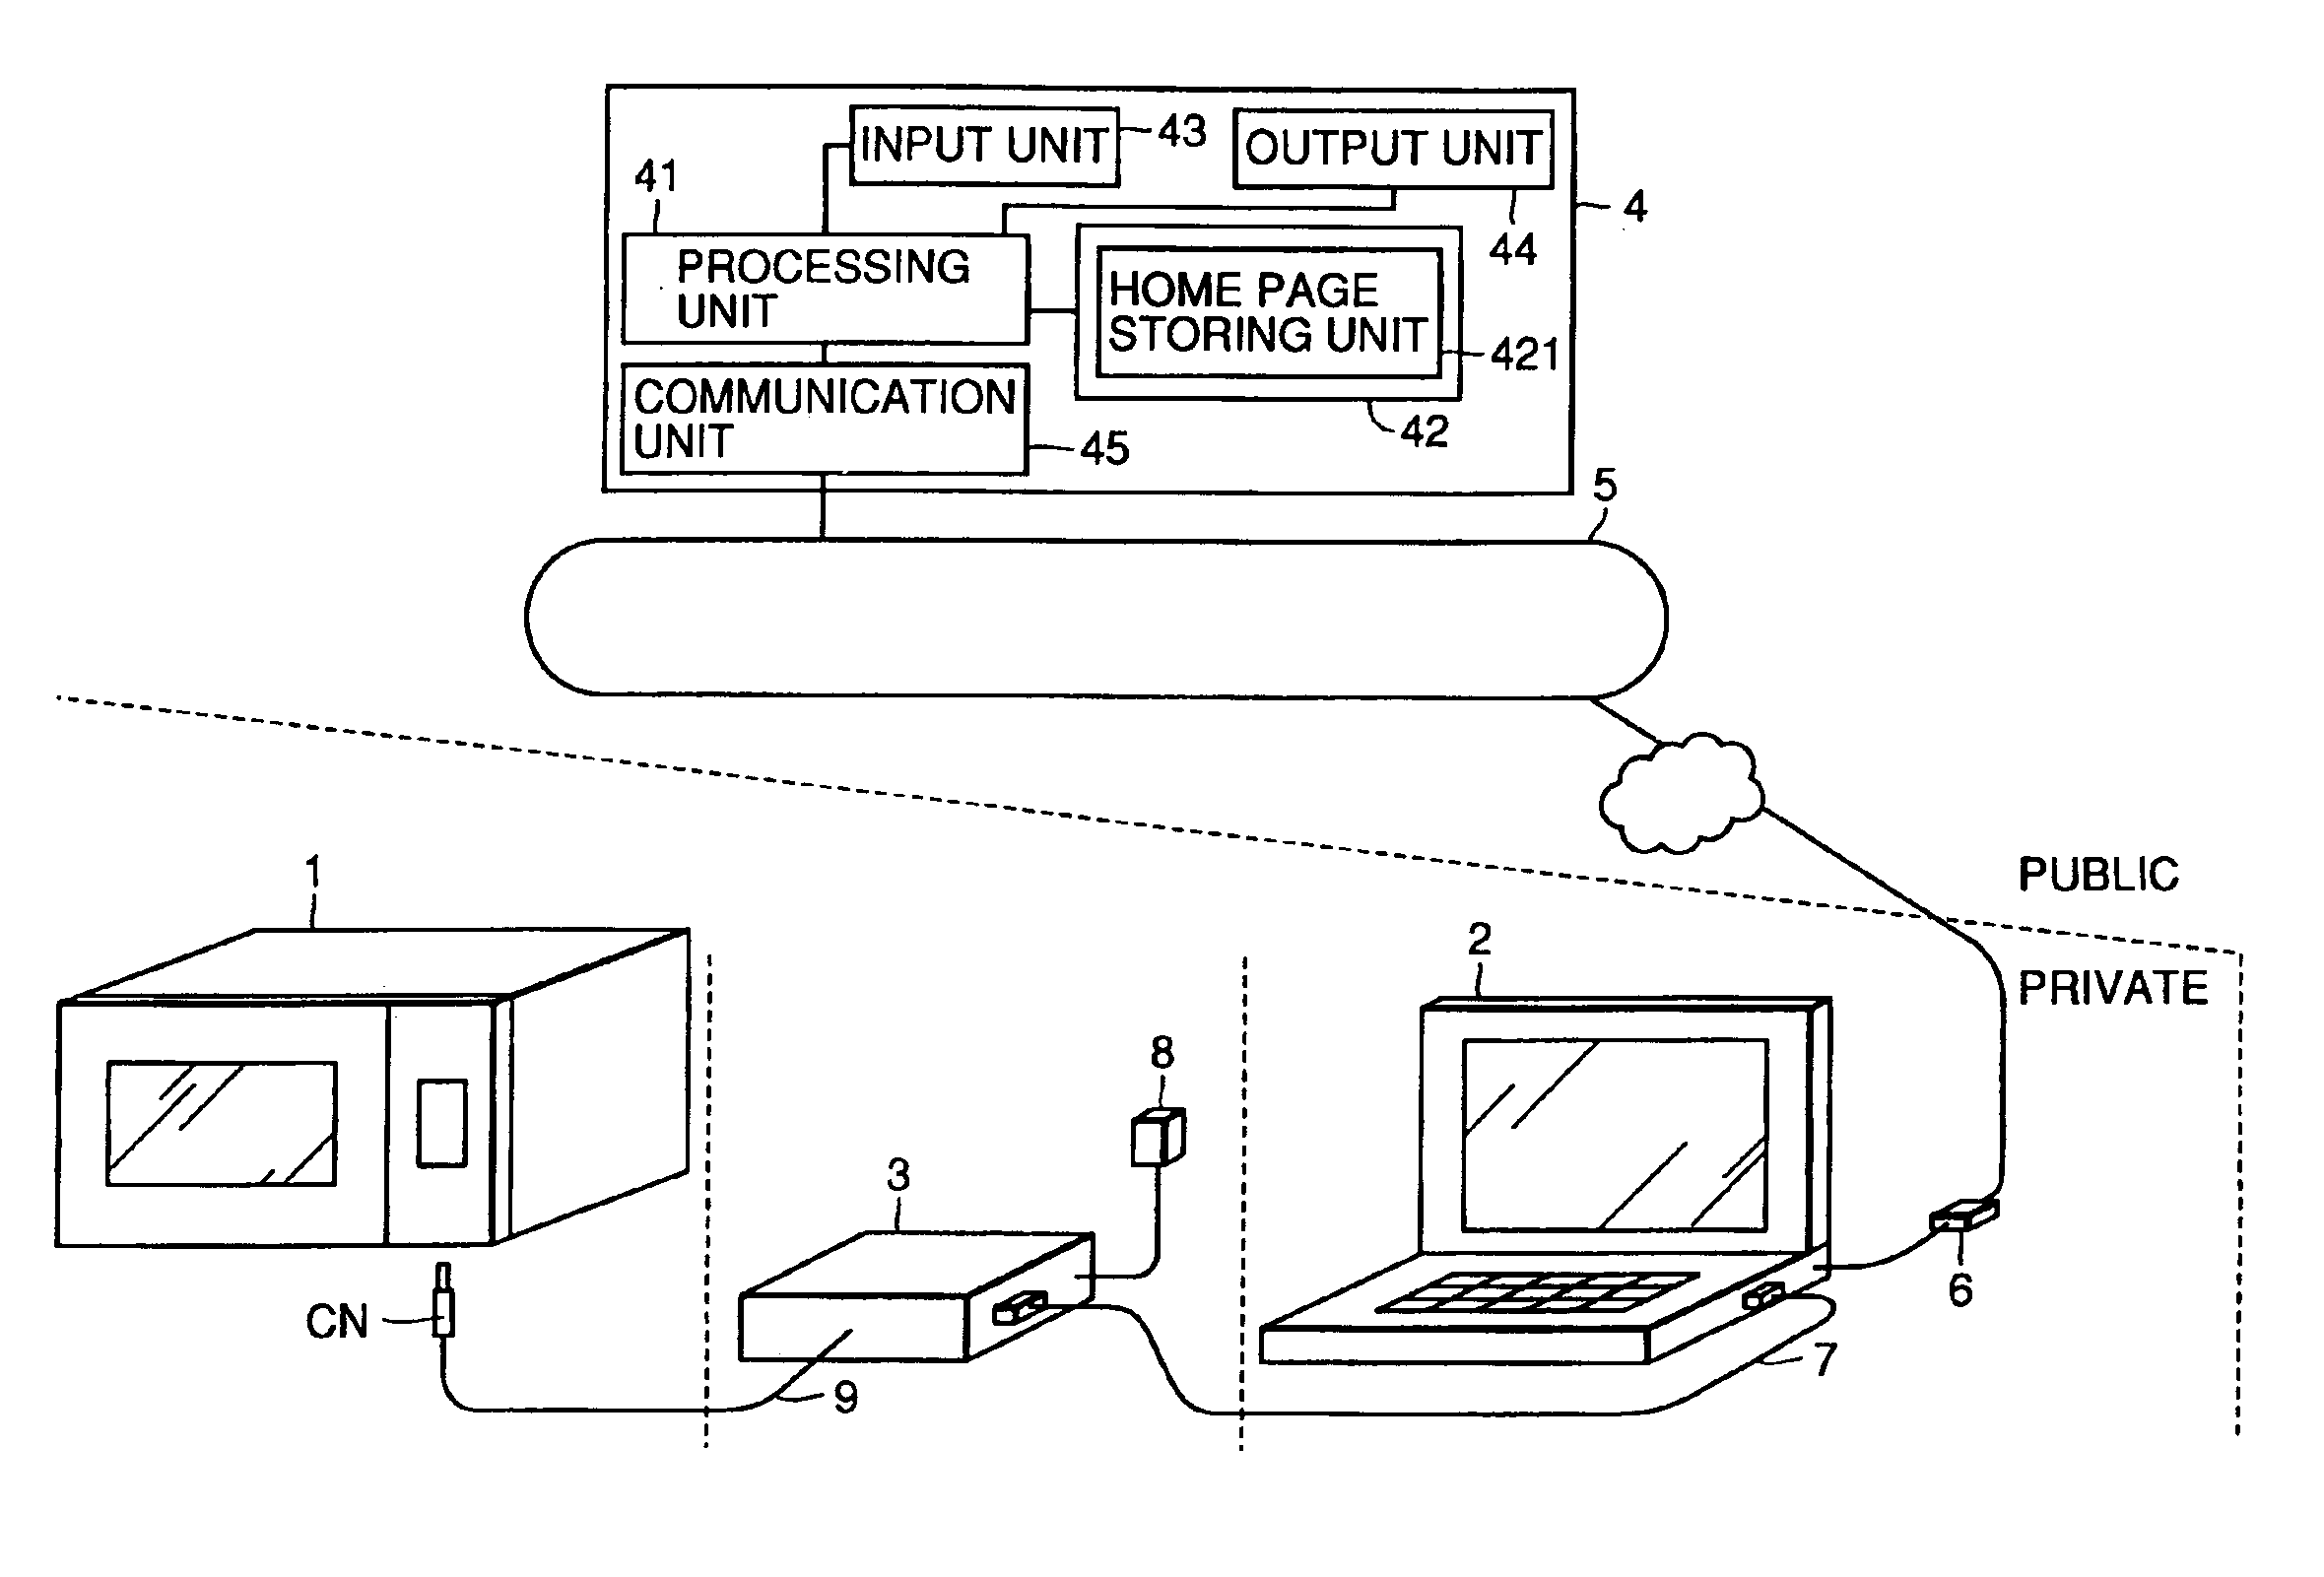 Methods and apparatus for controlling operation of a microwave oven in a network